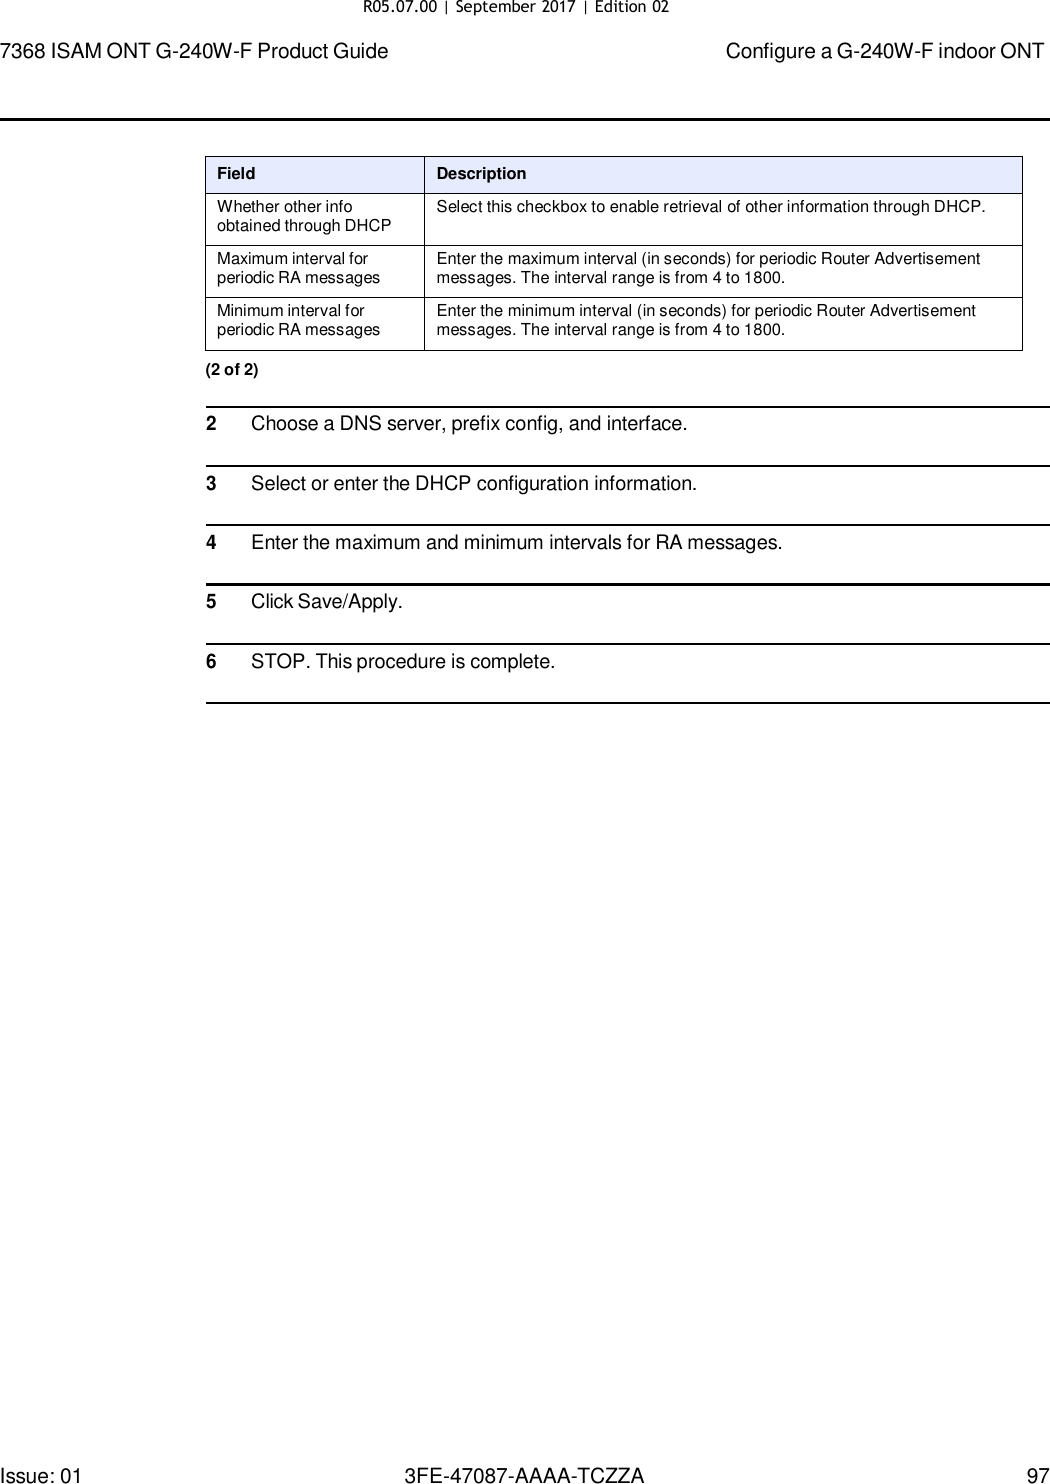 Page 91 of Nokia Bell G240WFV2 7368 ISAM GPON ONU User Manual 7368 ISAM ONT G 240W F Product Guide